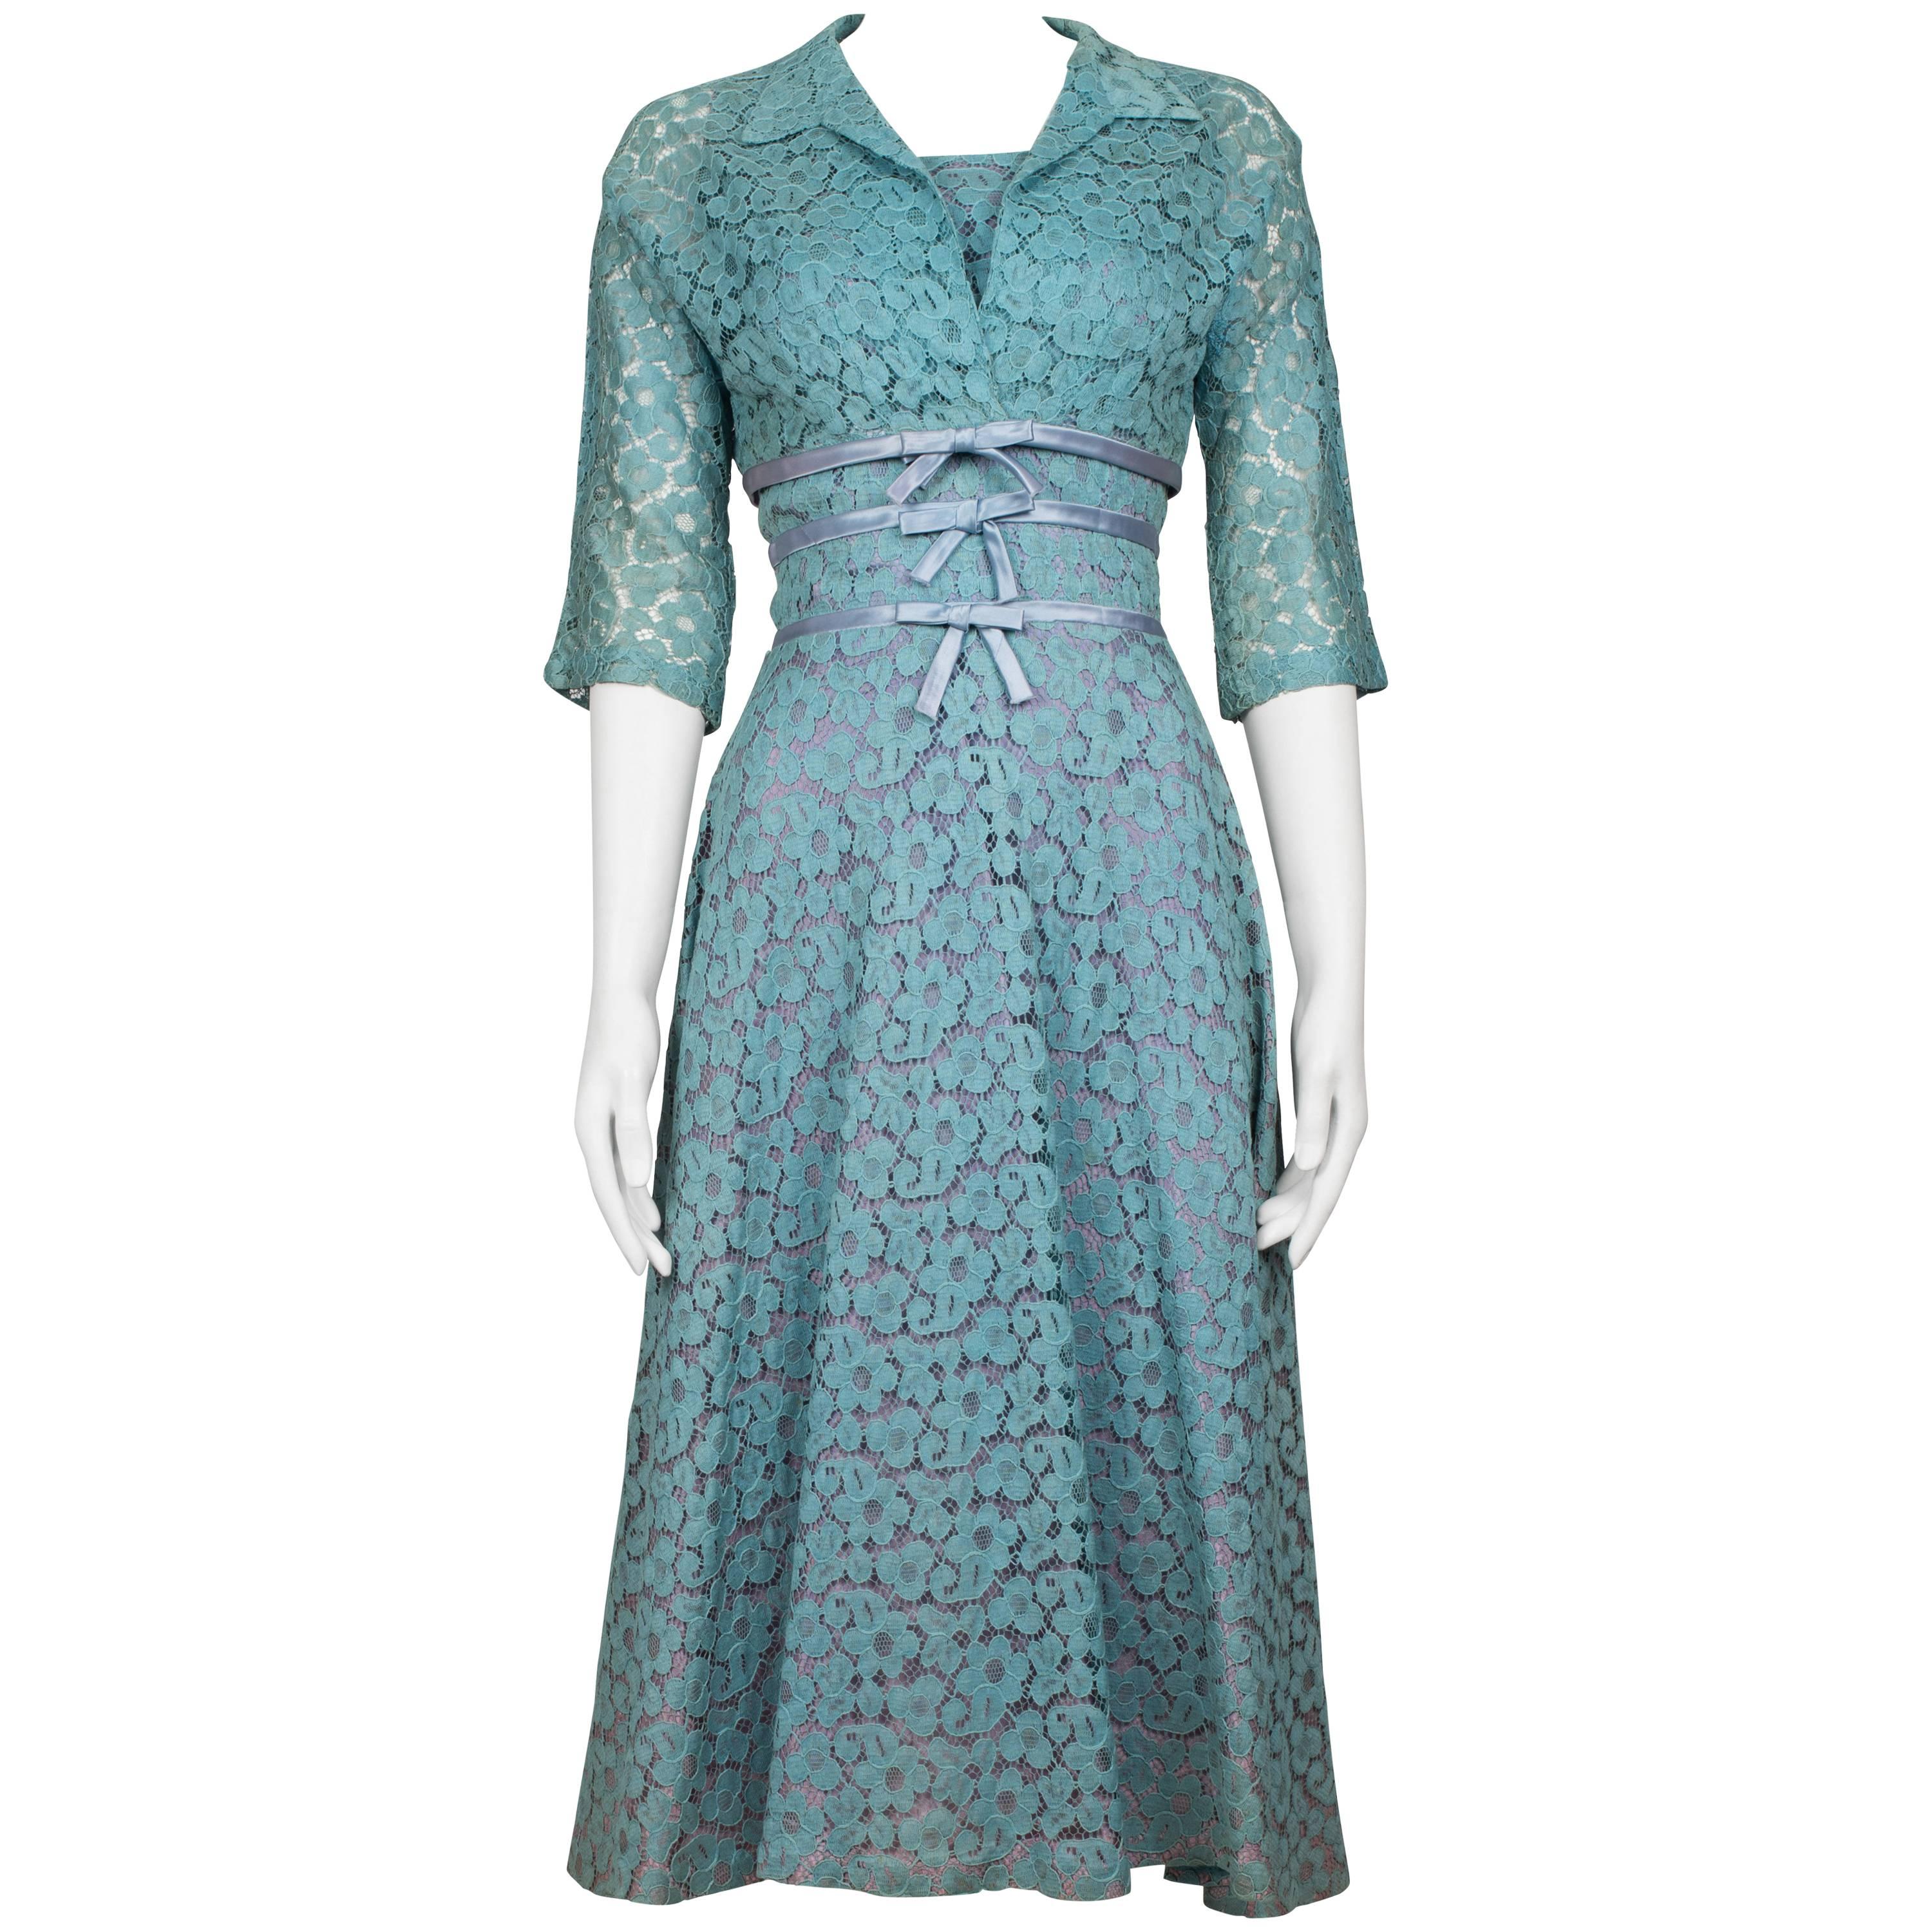 1950s Turquoise Lace and Trim Lilac Satin Trim Dress and Bolero For Sale